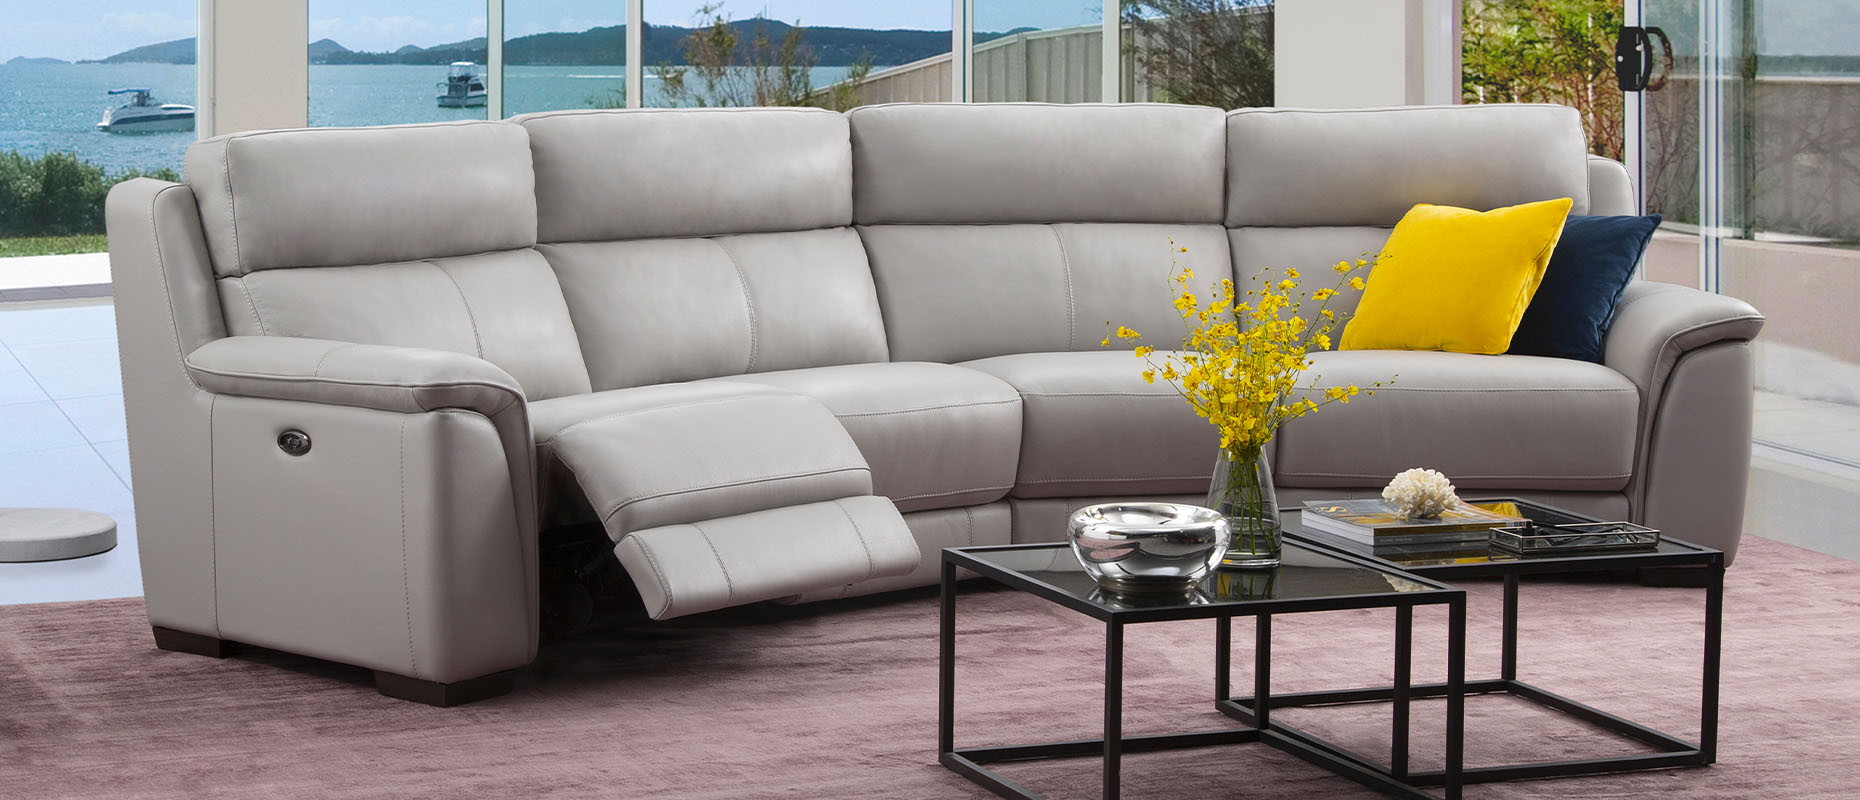 Cocoon sofa collection at Forrest Furnishing